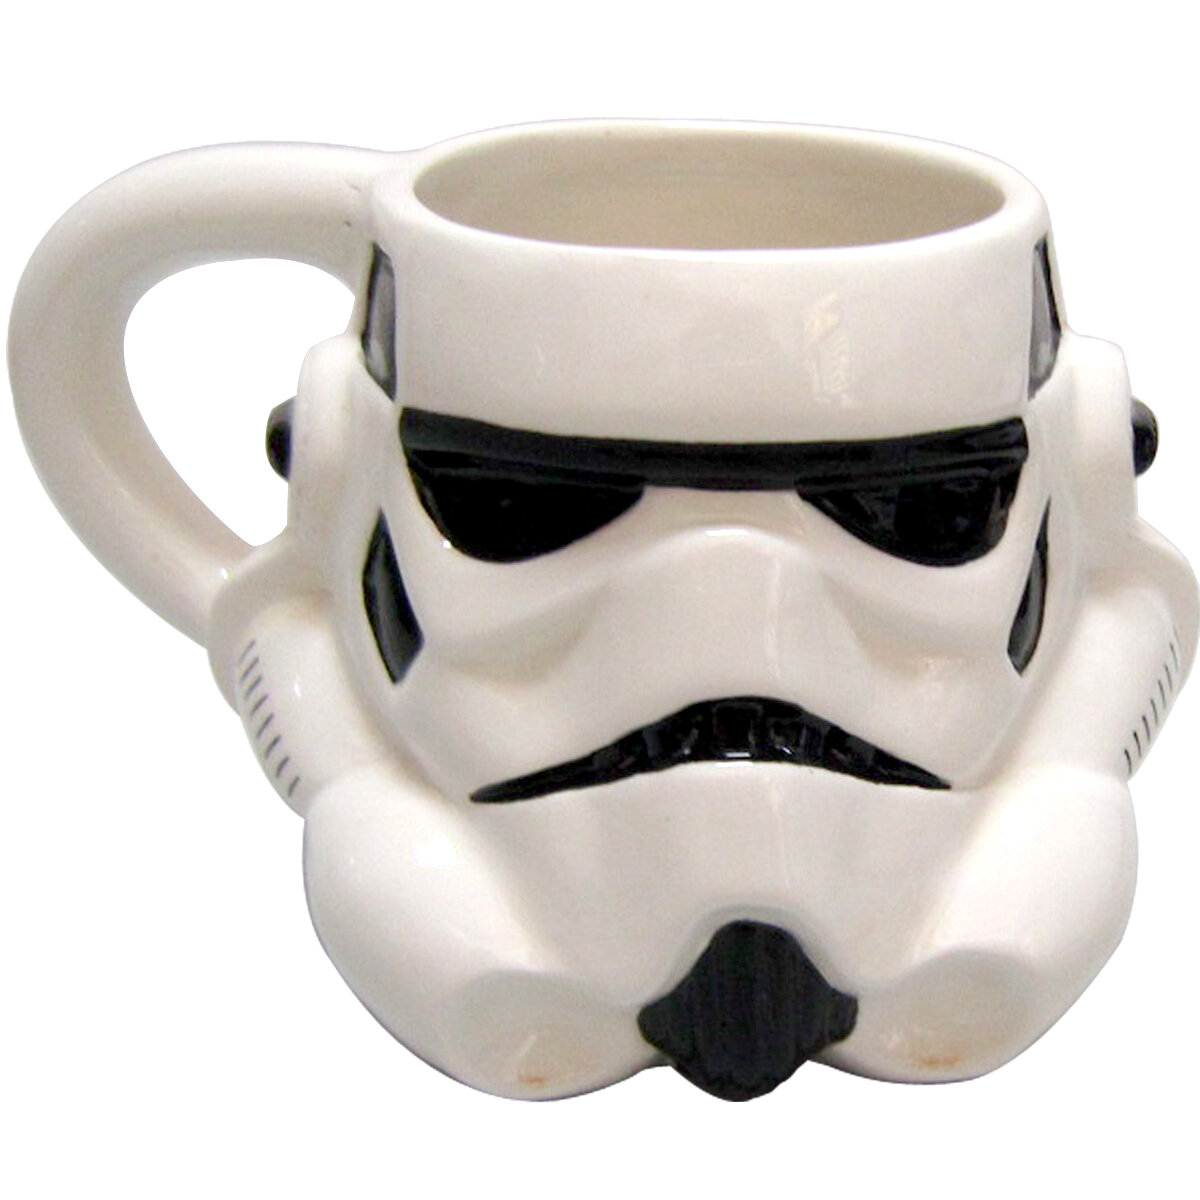 OFFICIAL STAR WARS STORMTROOPER TEXTURED RETRO MUG CUP NEW 